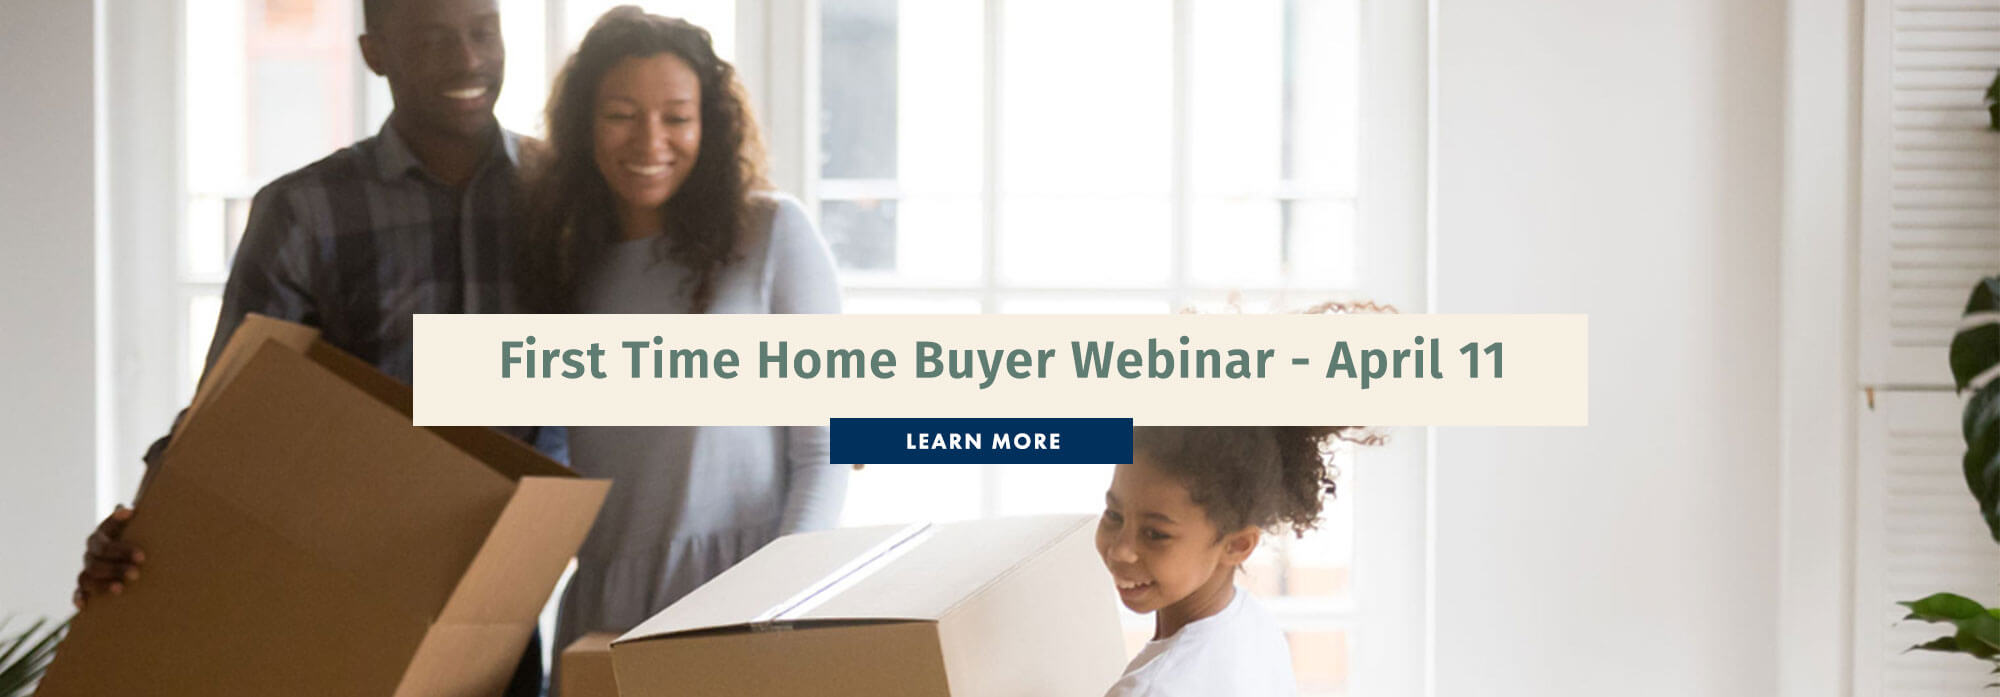 First Time Home Buyer Webinar - April 11